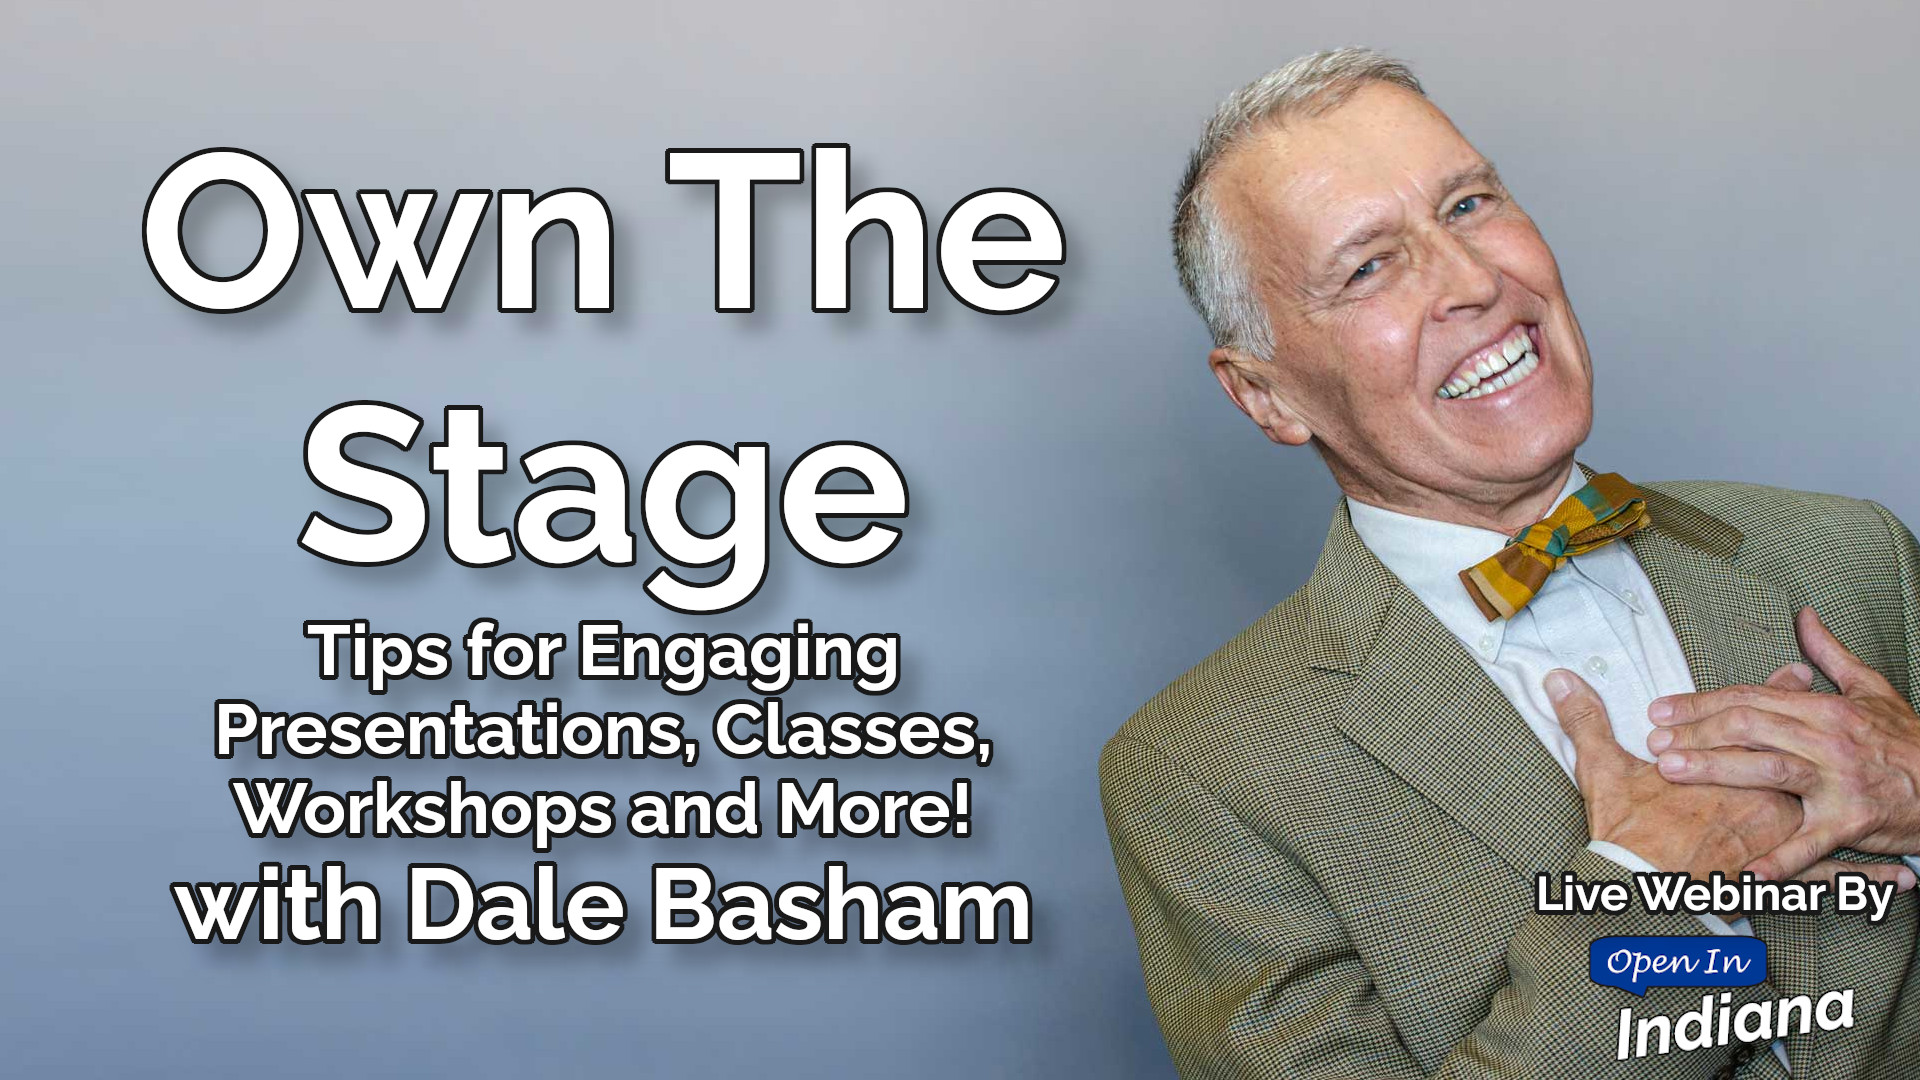 Own the Stage: Tips for Engaging Presentations, Classes, Workshops, and More with Dale Basham, Live webinar by Open In Indiana/INSPIREsmall.biz